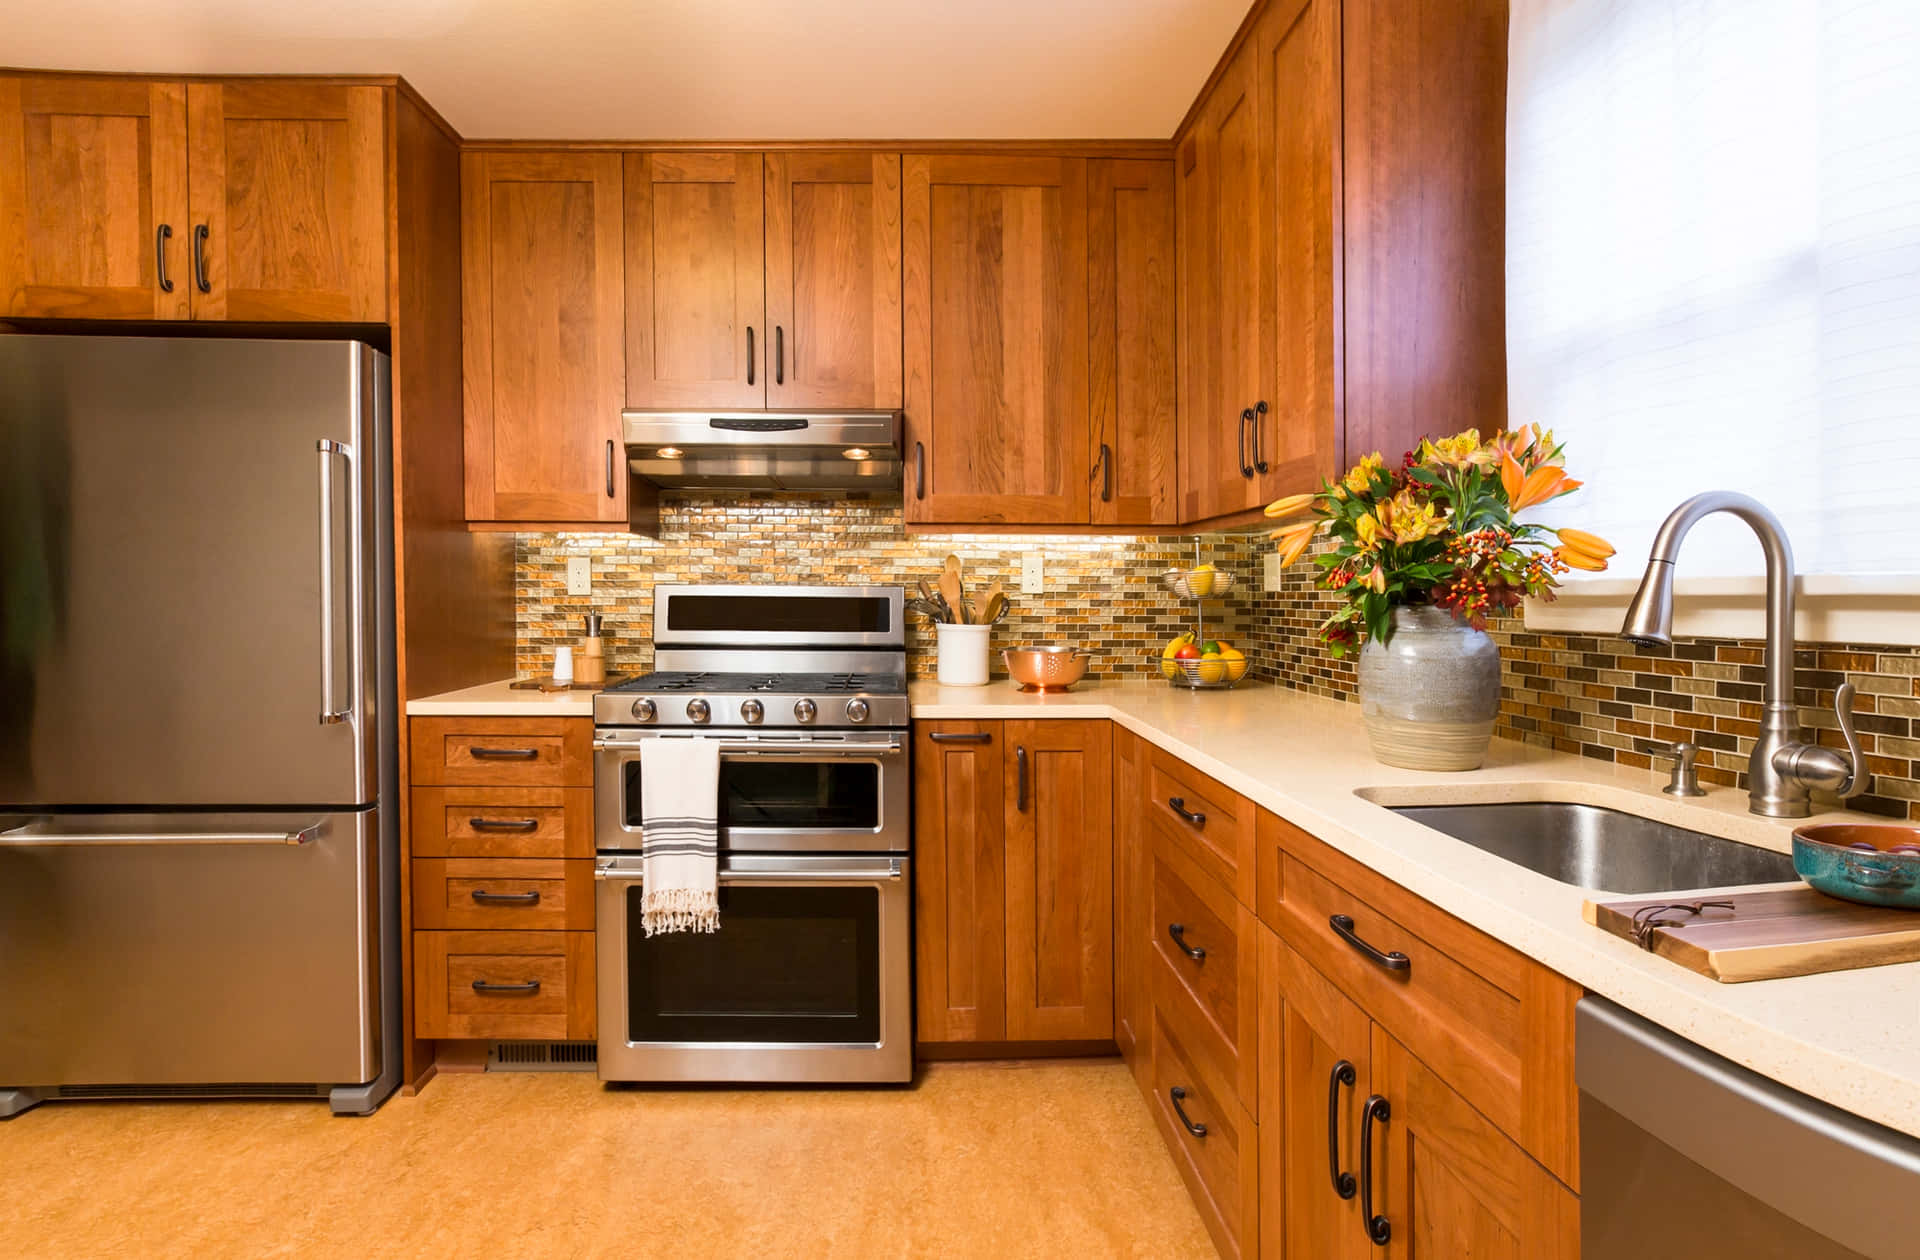 A Kitchen With Wood Cabinets And Stainless Steel Appliances